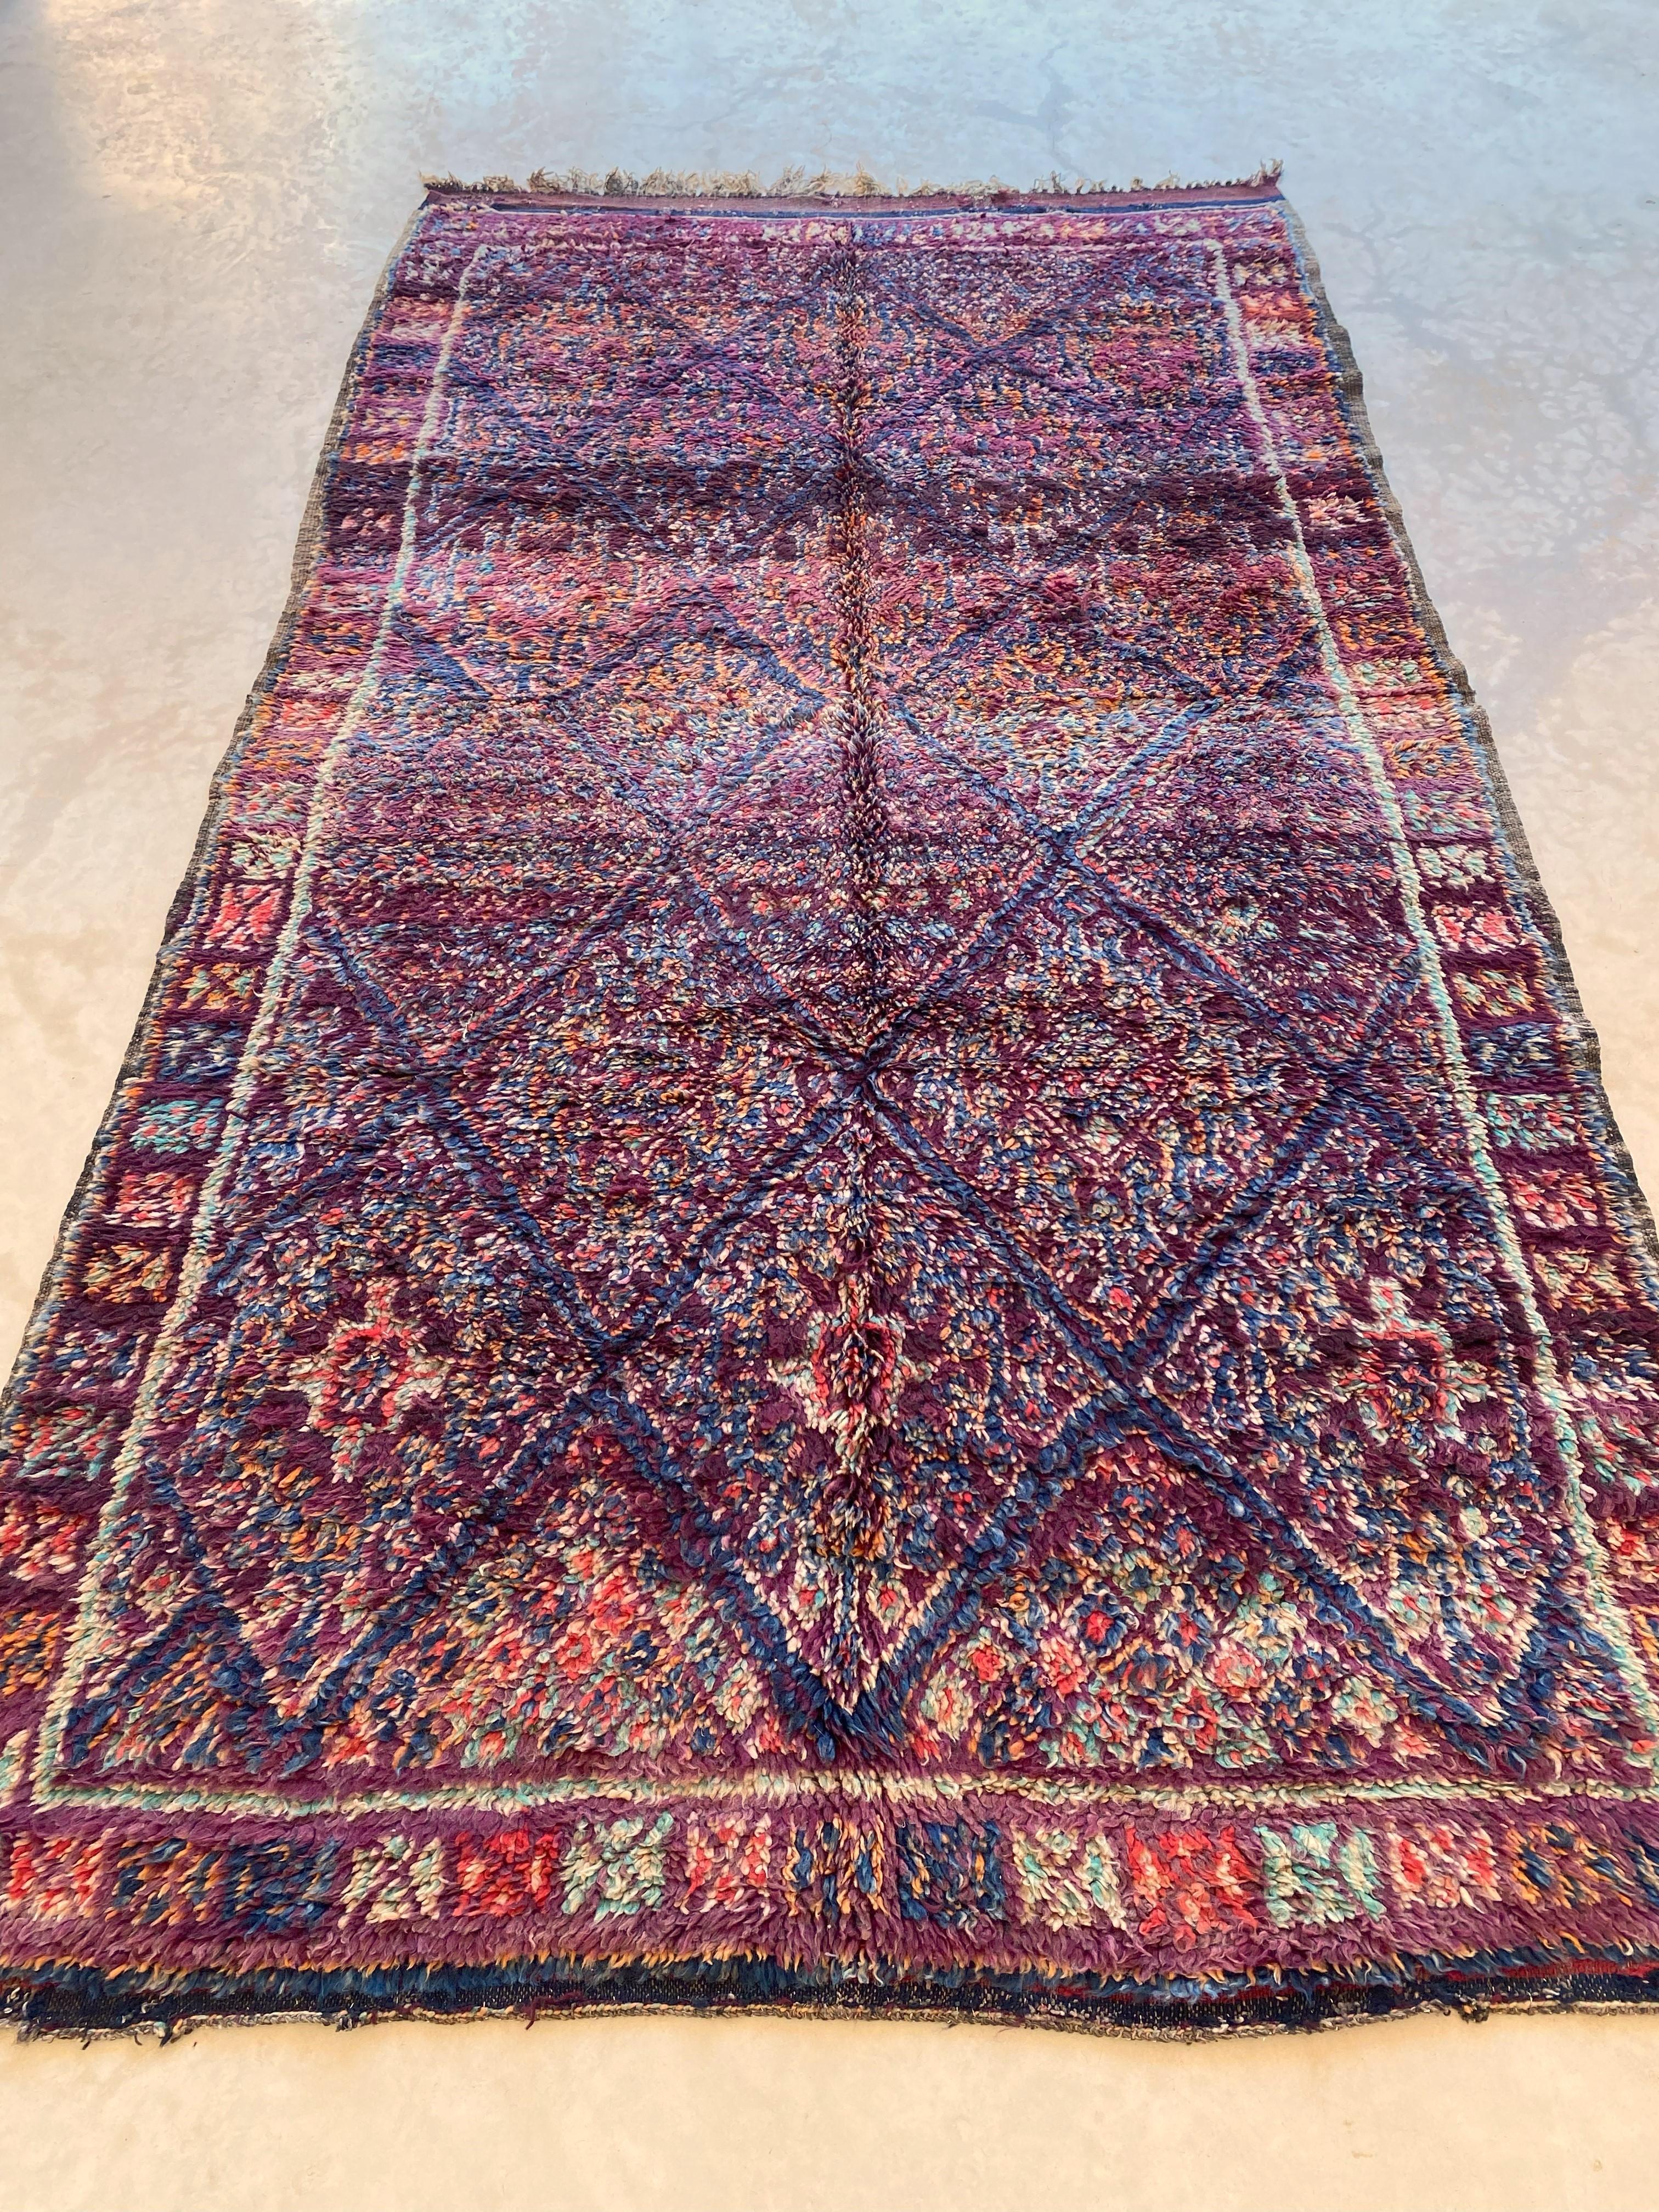 Vintage Moroccan Beni Mguild rug - Purple/blue - 5.8x10.4feet / 176x317cm In Good Condition For Sale In Marrakech, MA